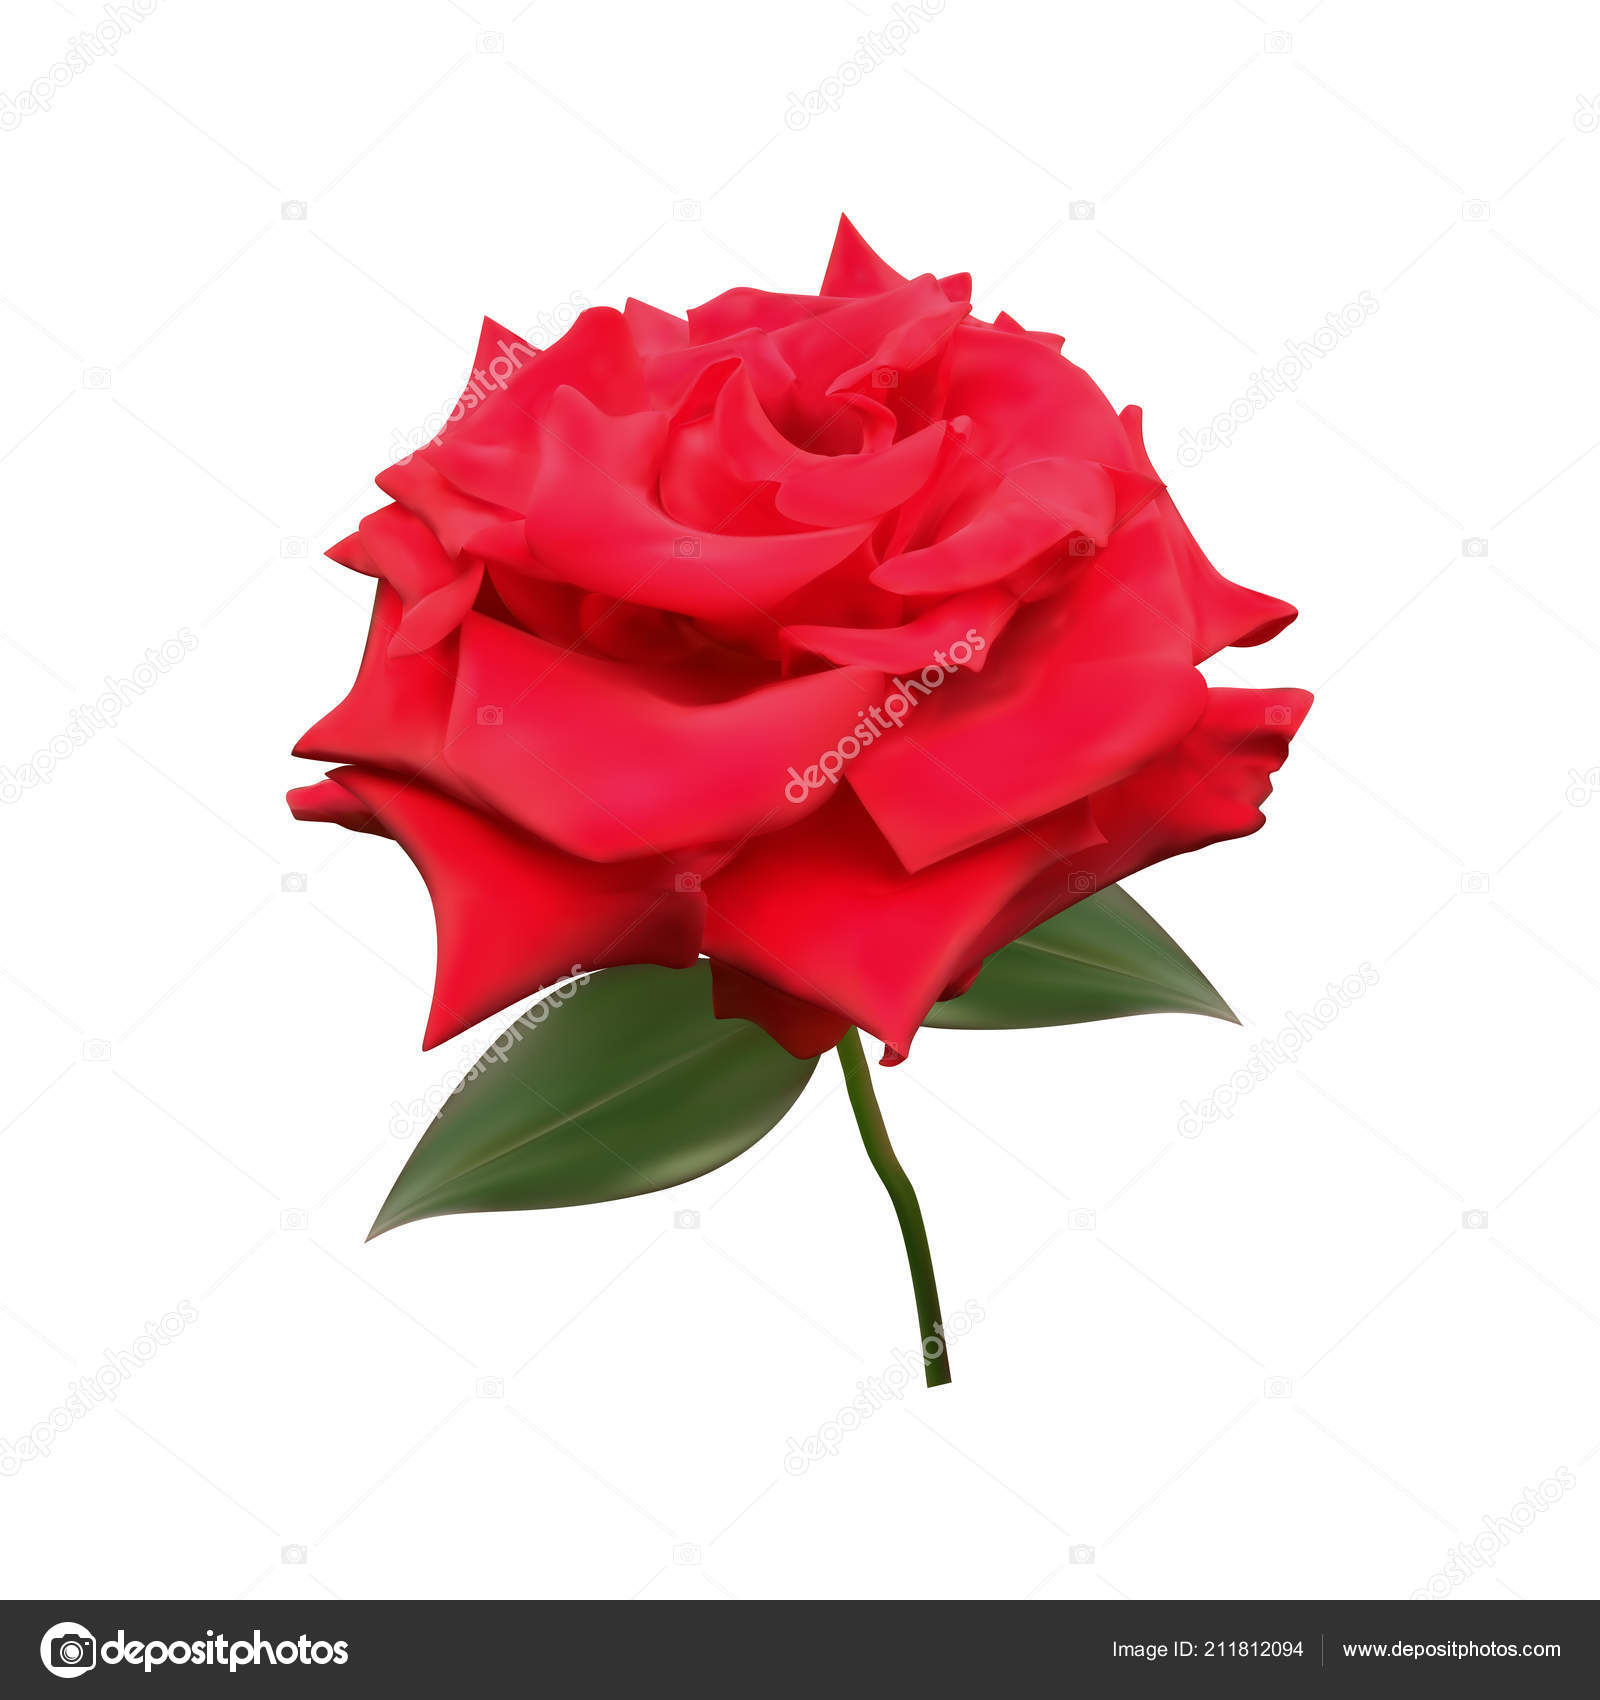 Wallpapers: red rose 3d wallpaper | Realistic red rose close up